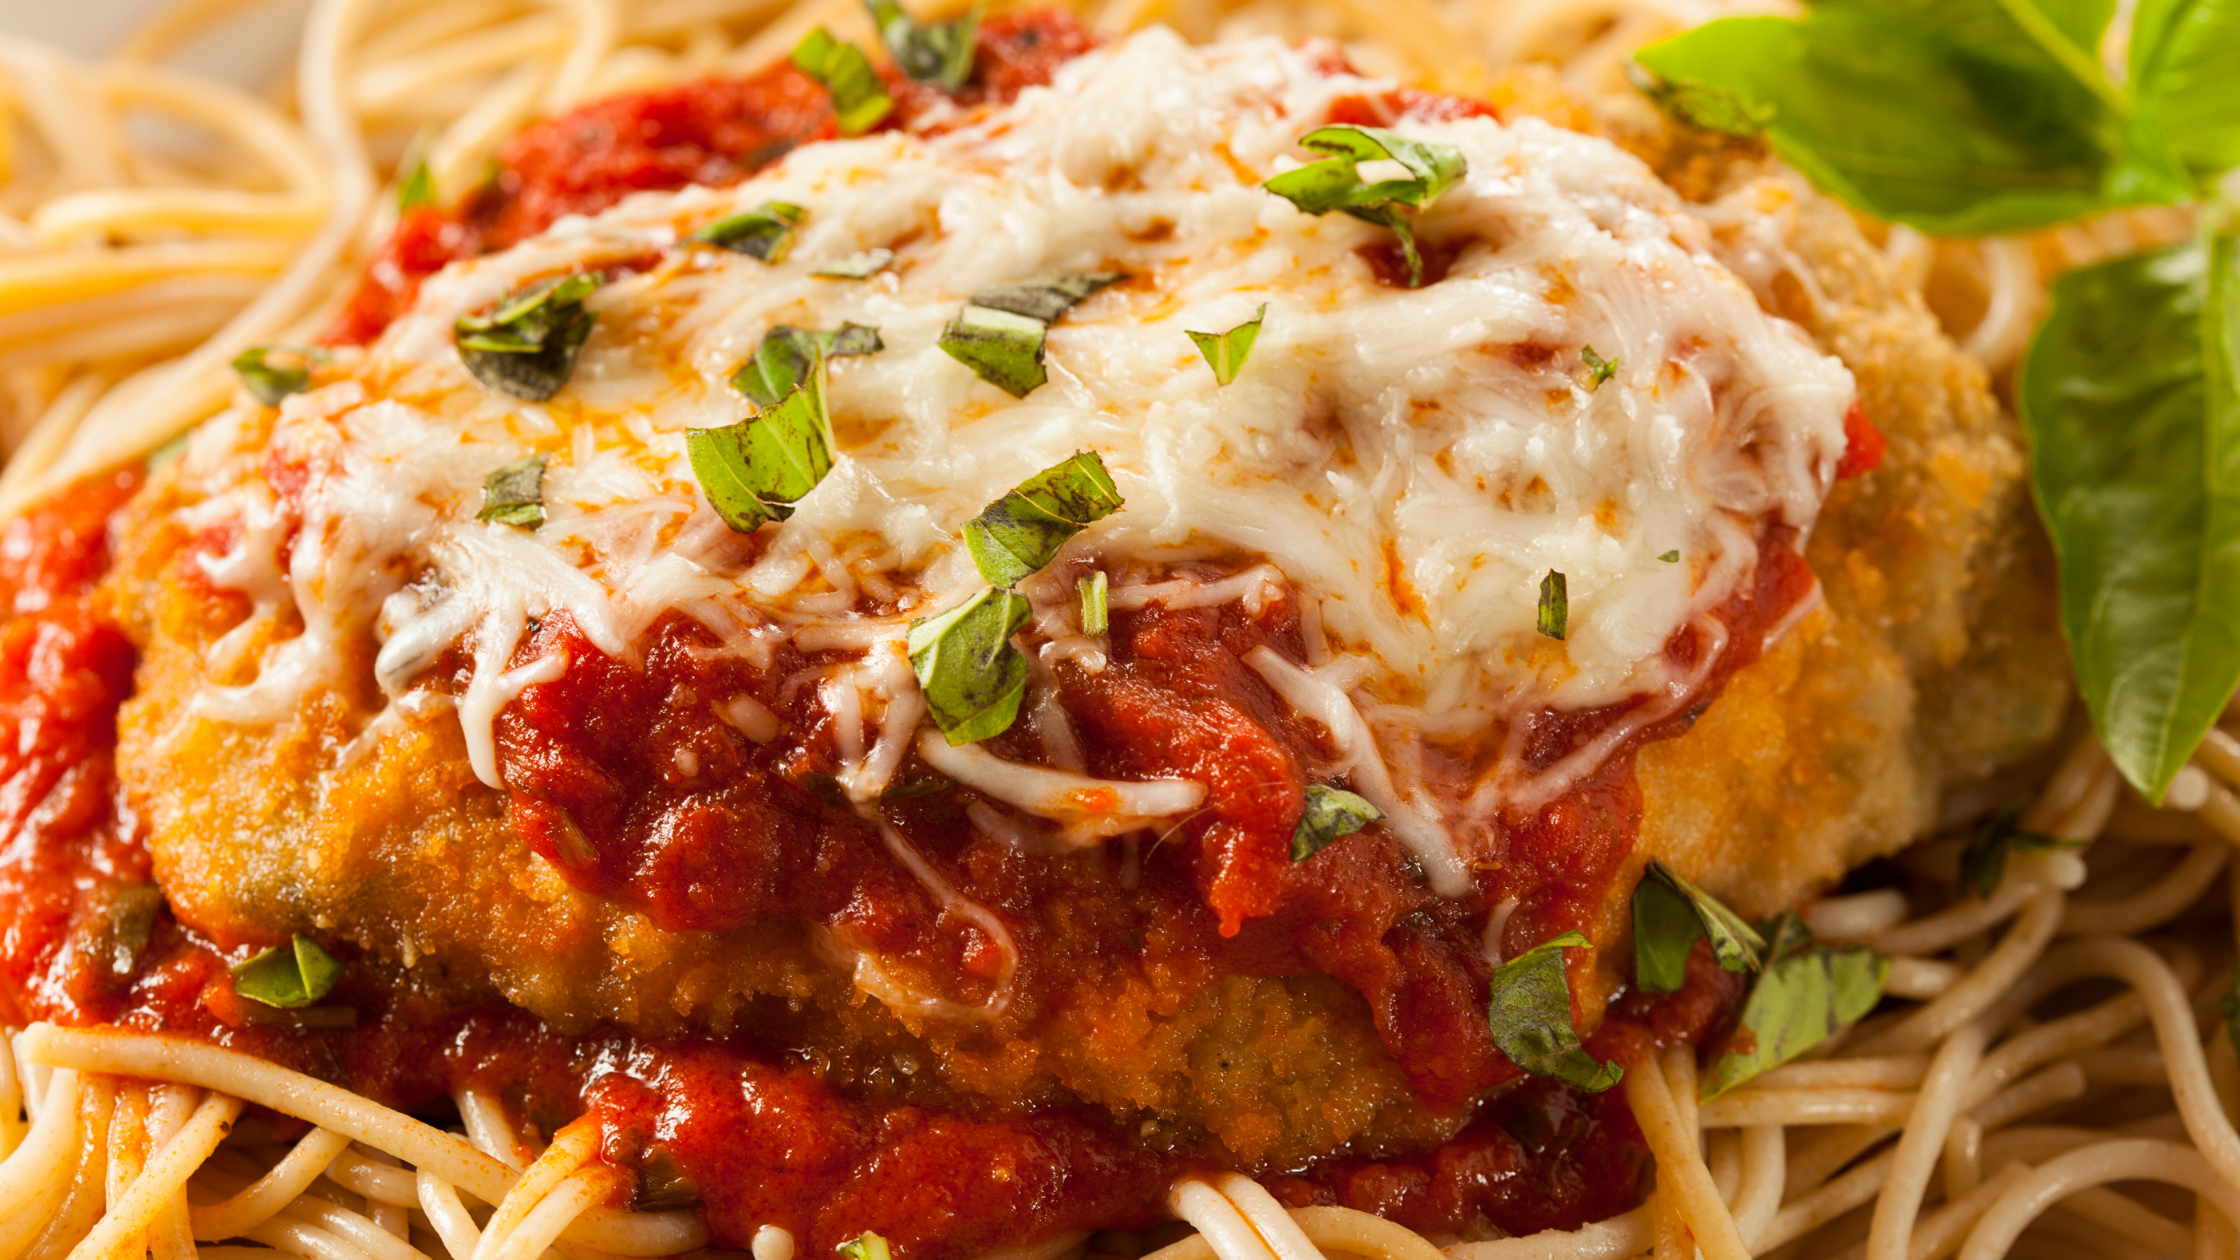 Low Calorie Chicken Parmesan with Whole Grain Spaghetti: A Healthy Recipe for Delicious Italian Food 5